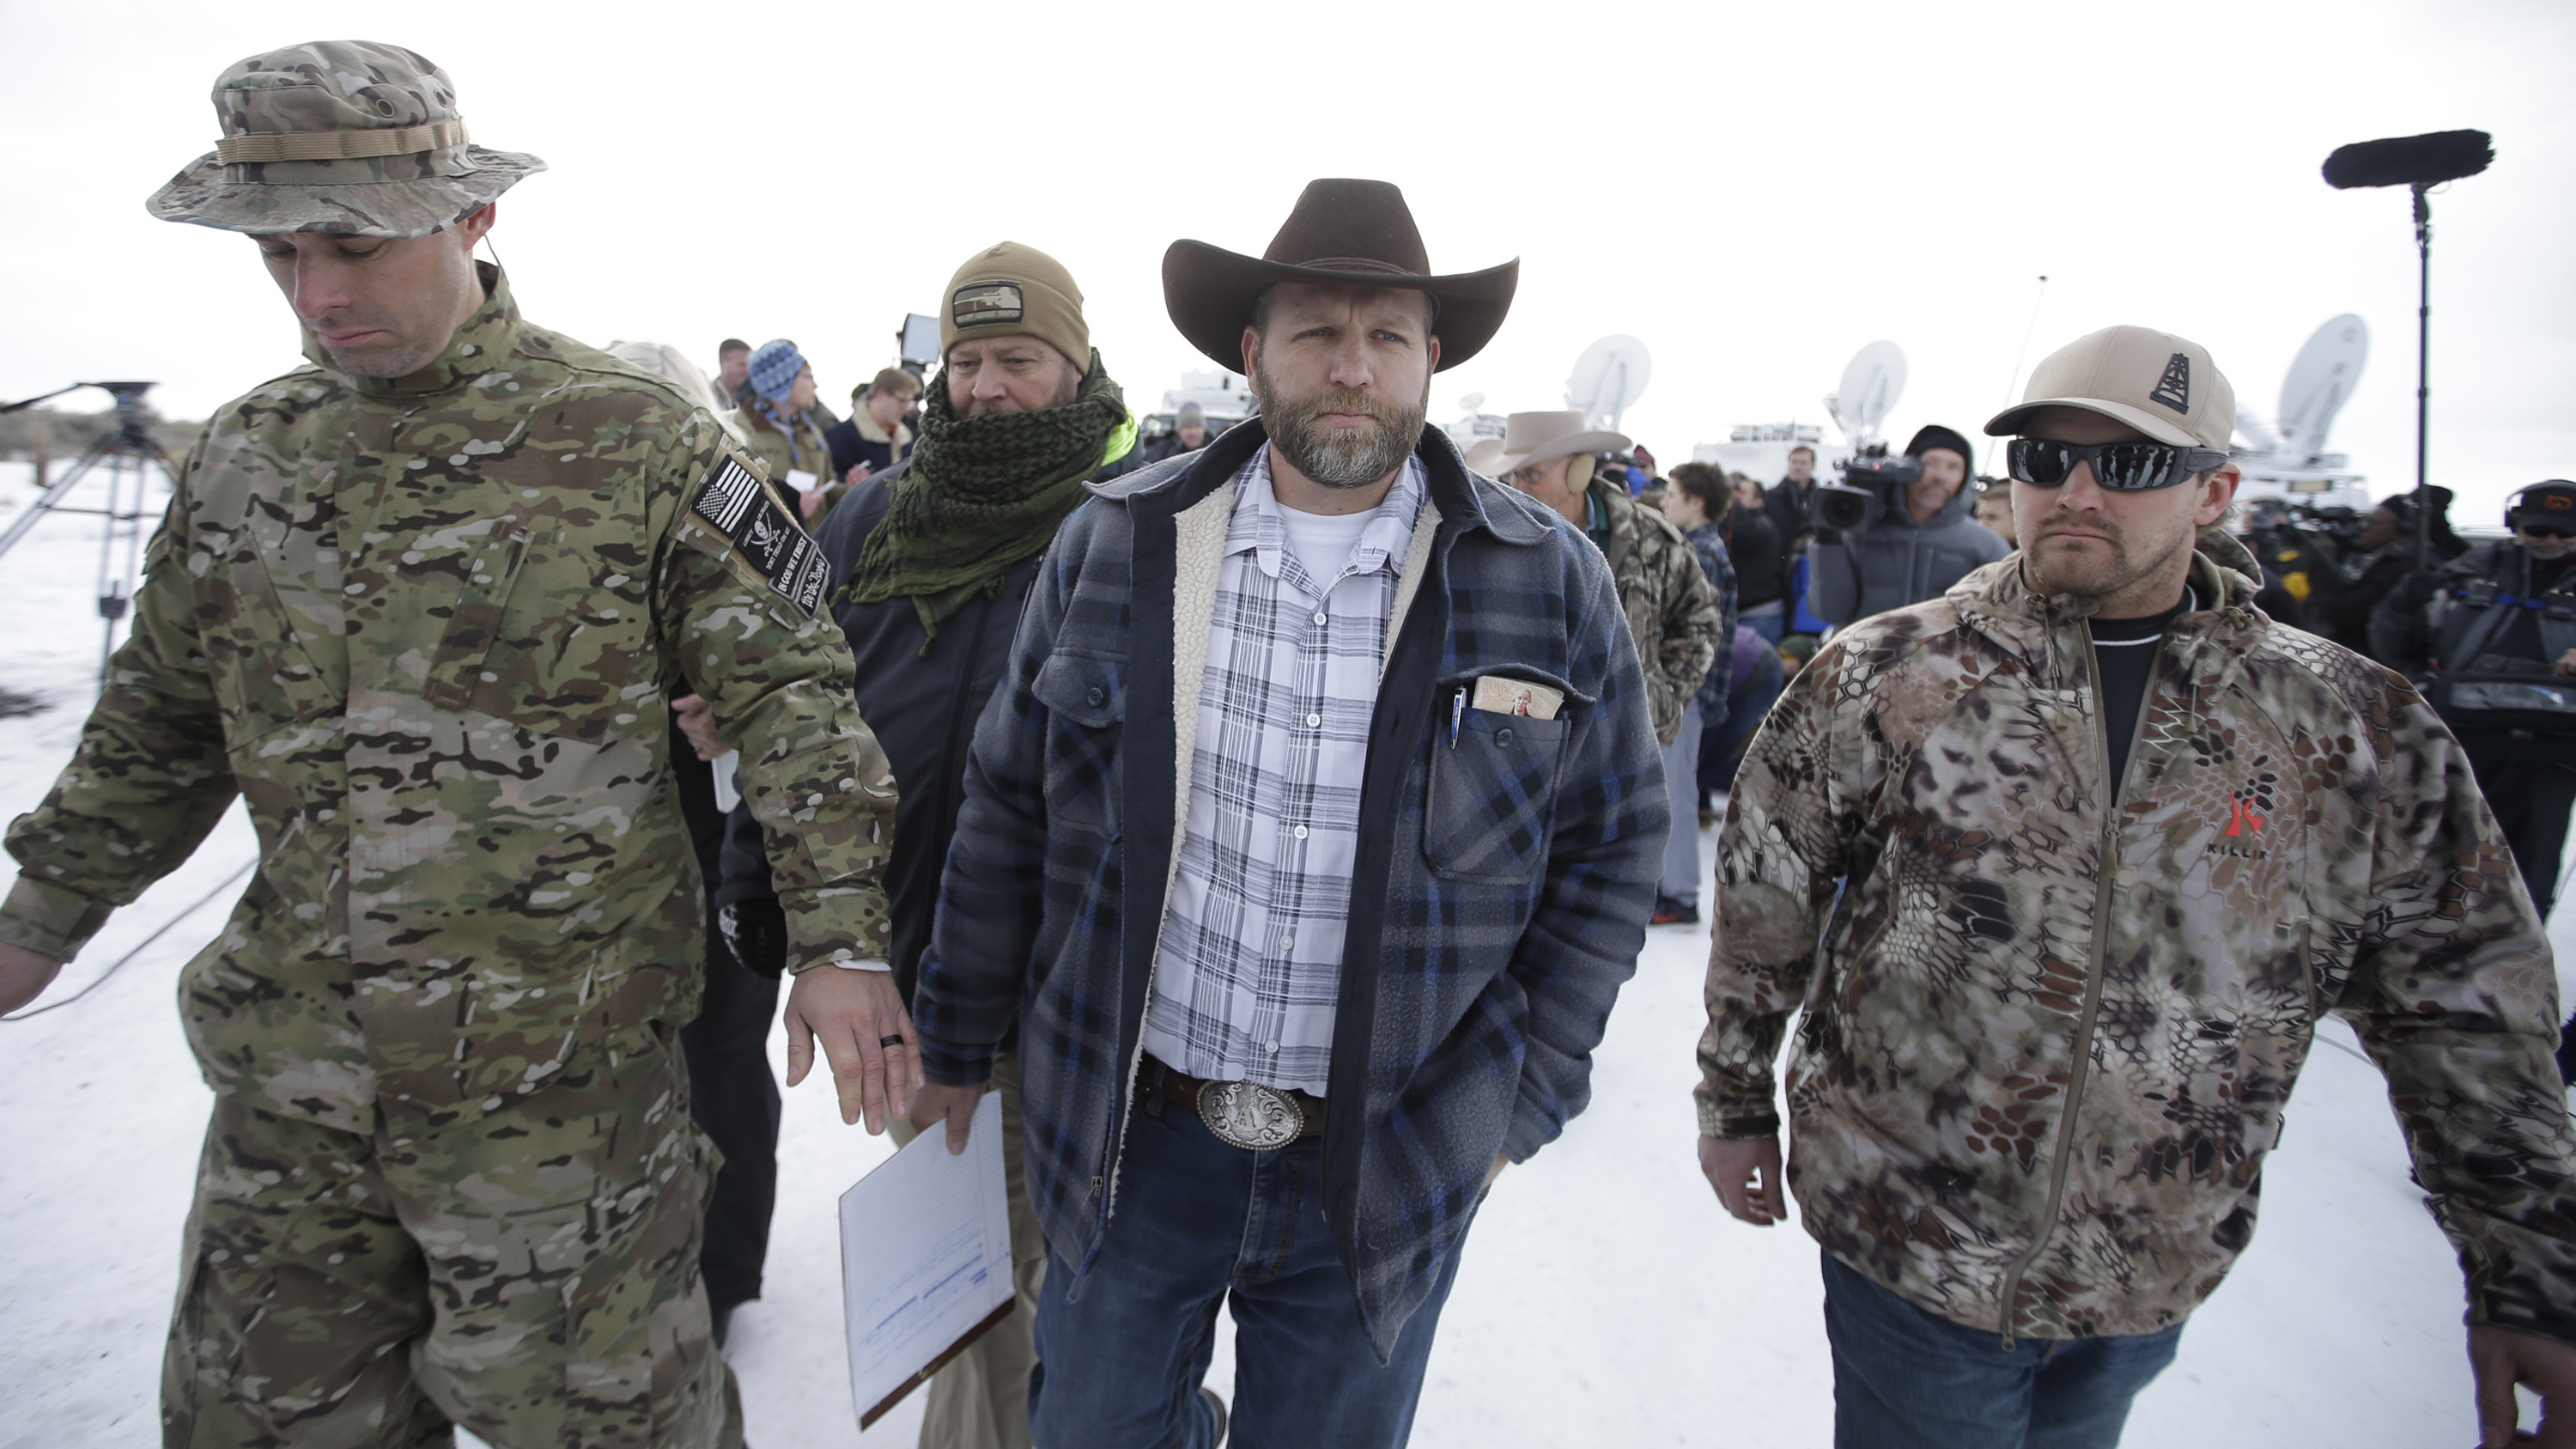 Ammon Bundy [center] is one of the occupiers at the Malheur National Wildlife Refuge headquarters near Burns, Ore. Rick Bowmer/AP